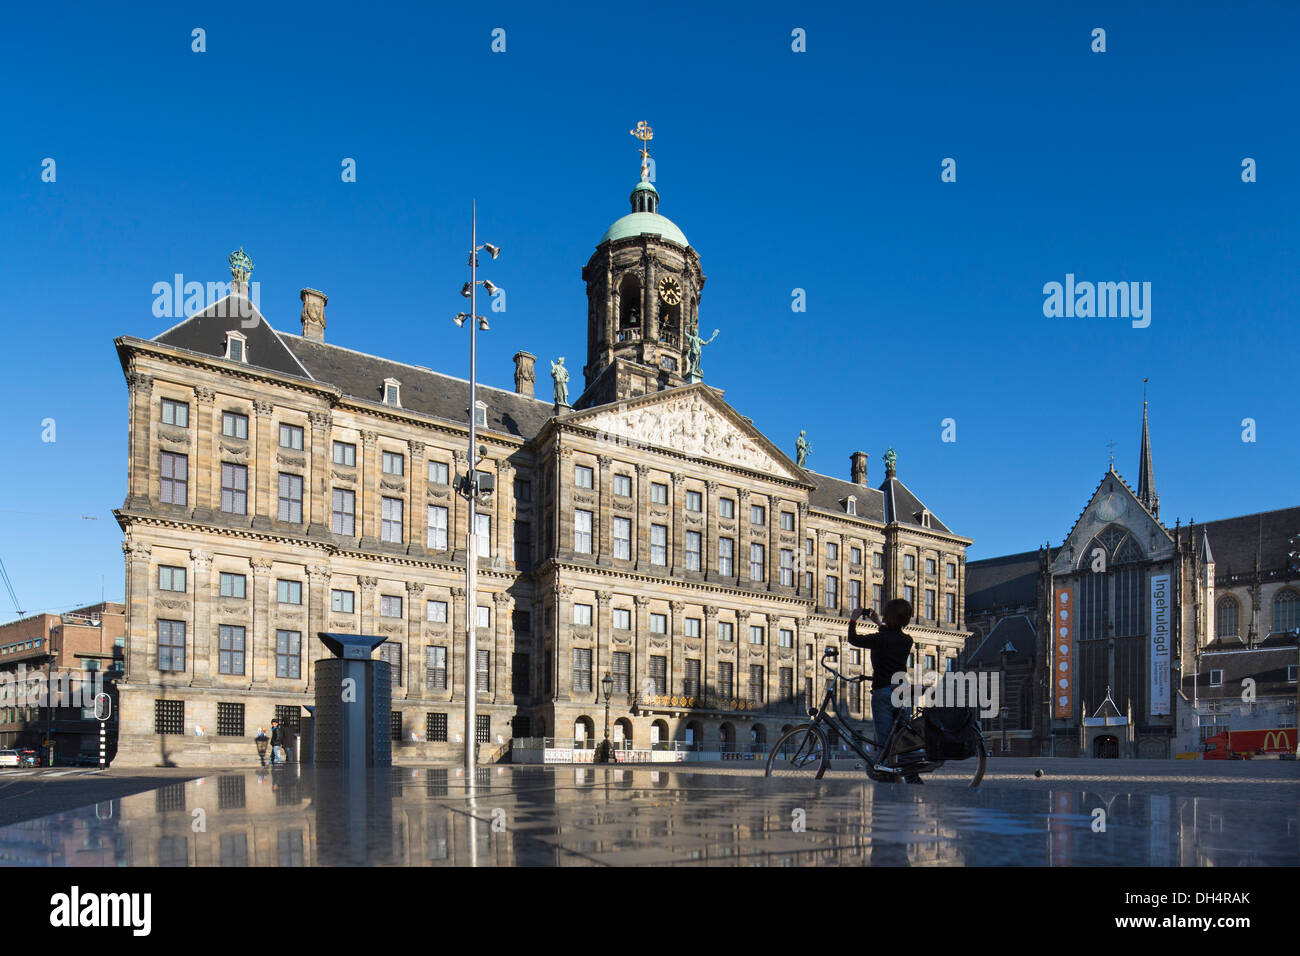 Netherlands, Amsterdam, Royal Palace on Dam square. Woman with bicycle takes picture Stock Photo